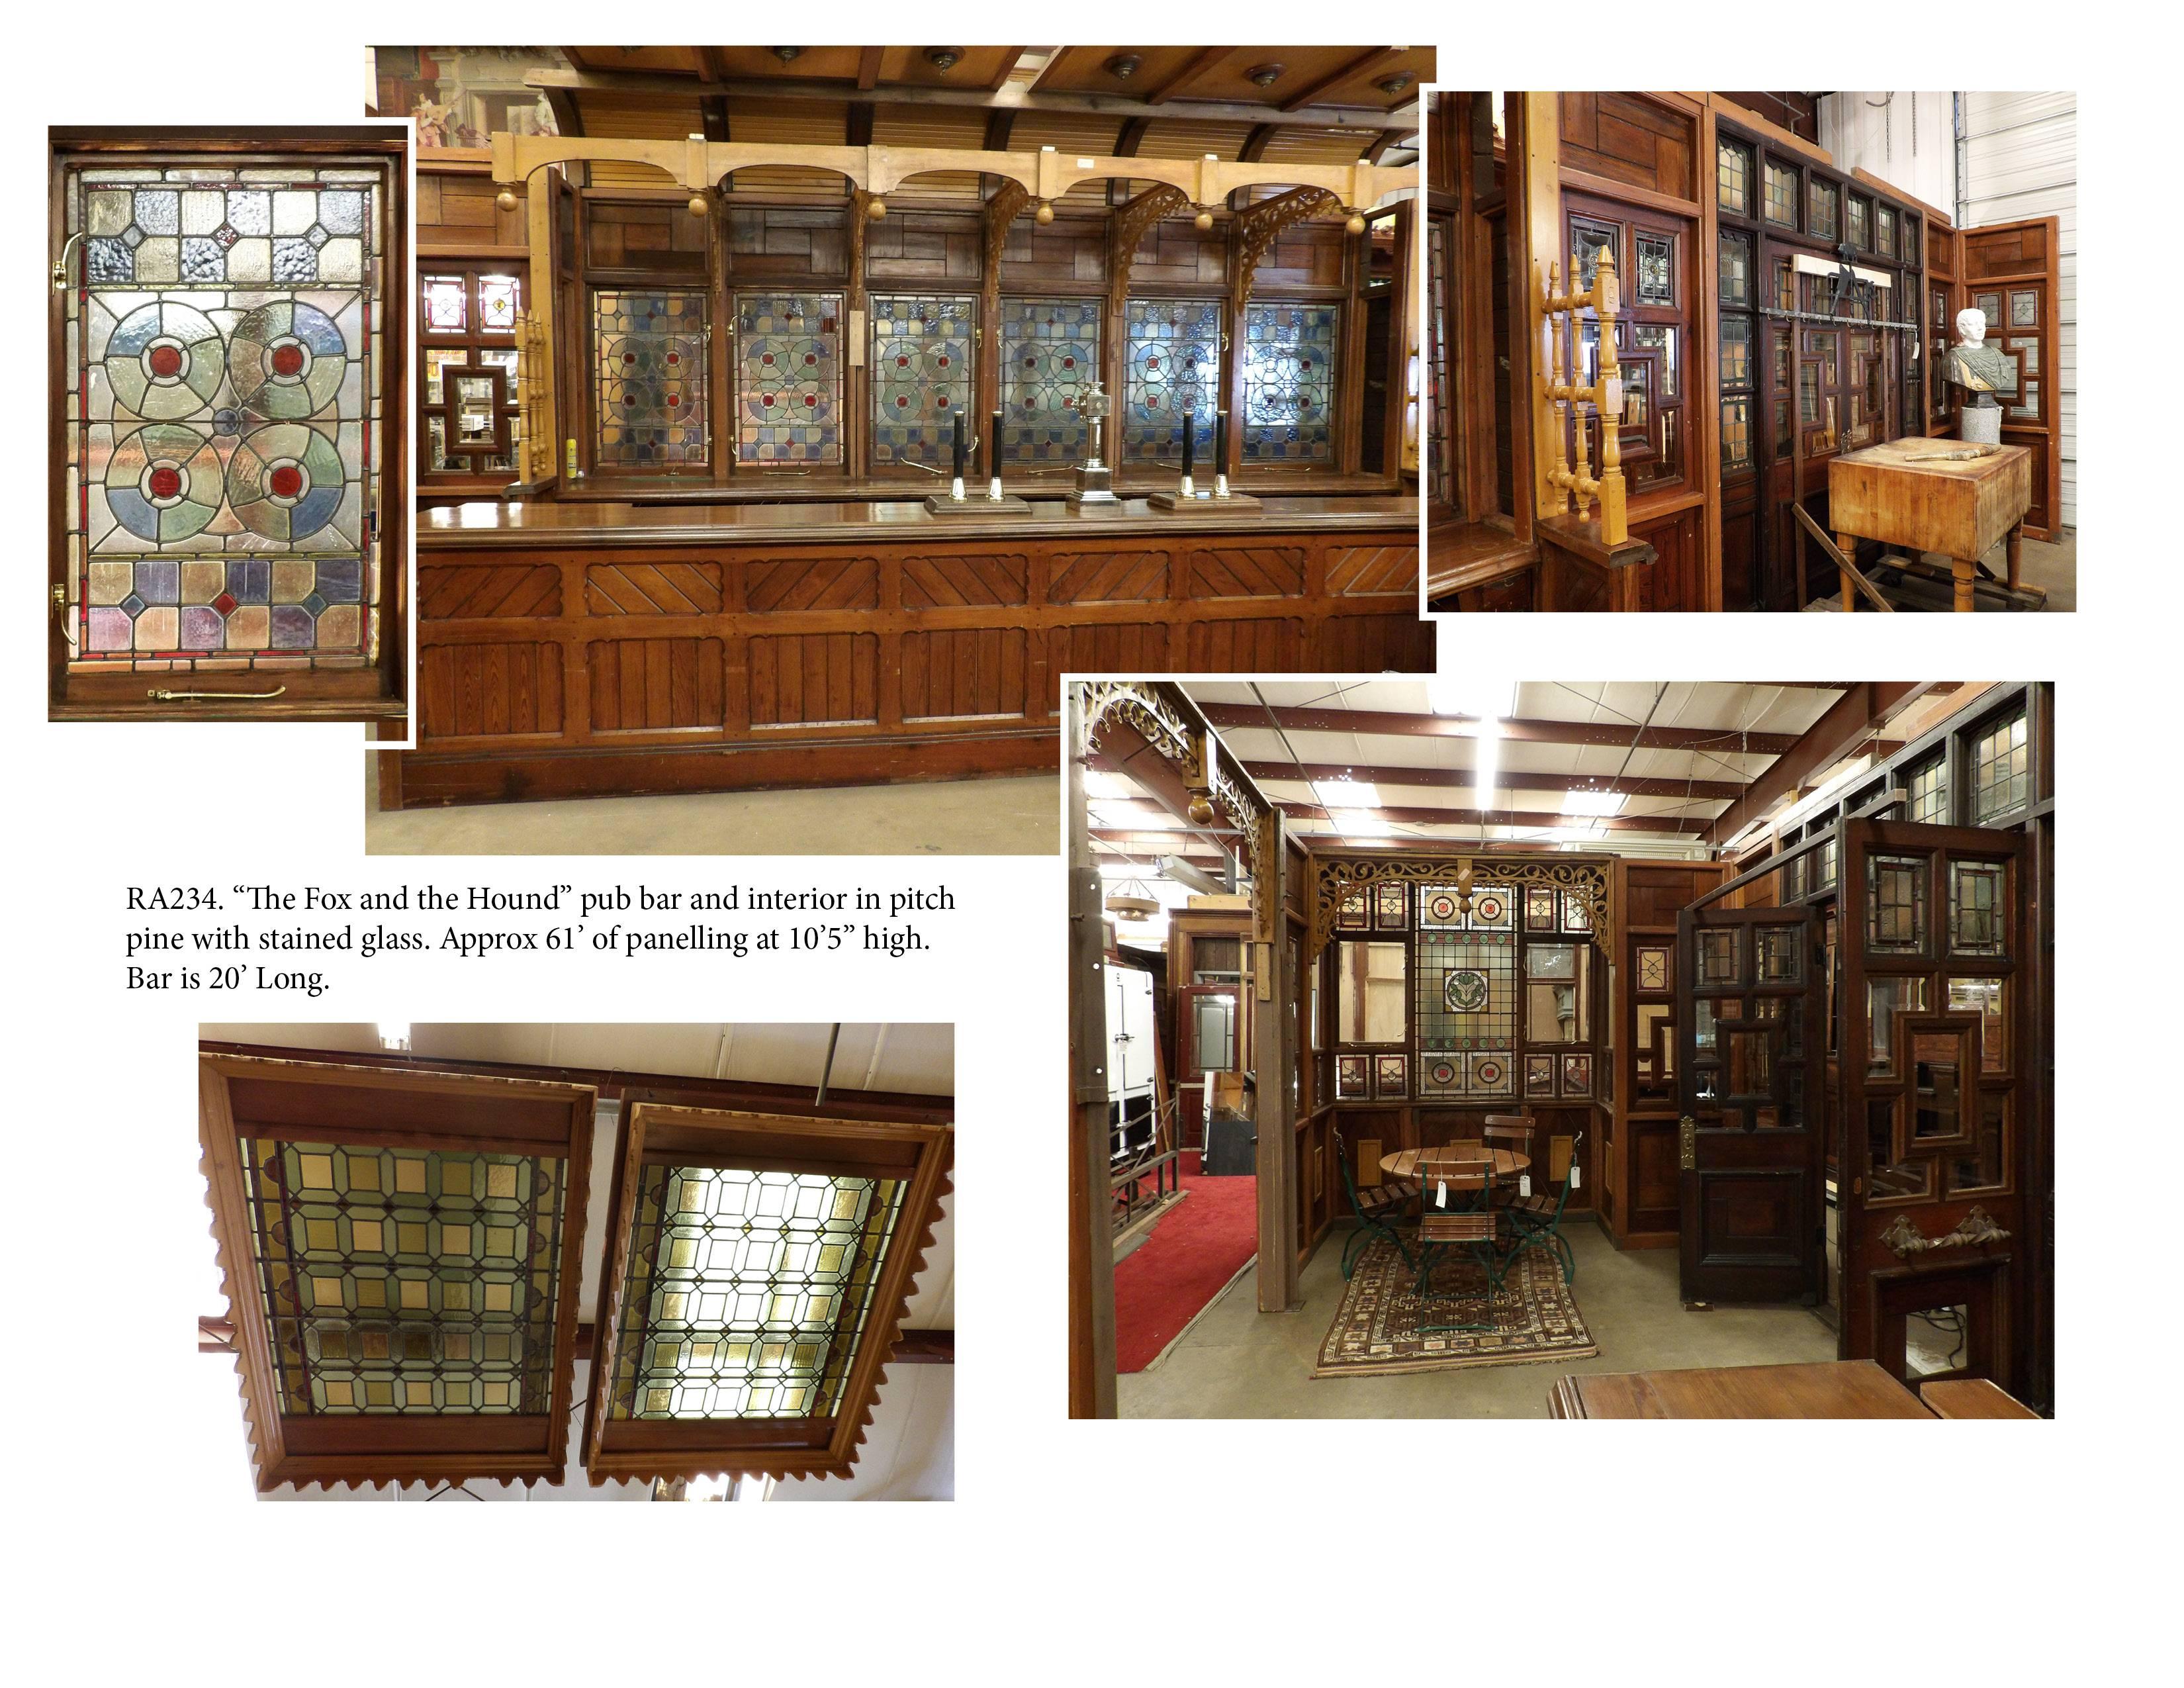 English pub bar "Fox & Hounds" with room panelling and stained glass ceiling panels.